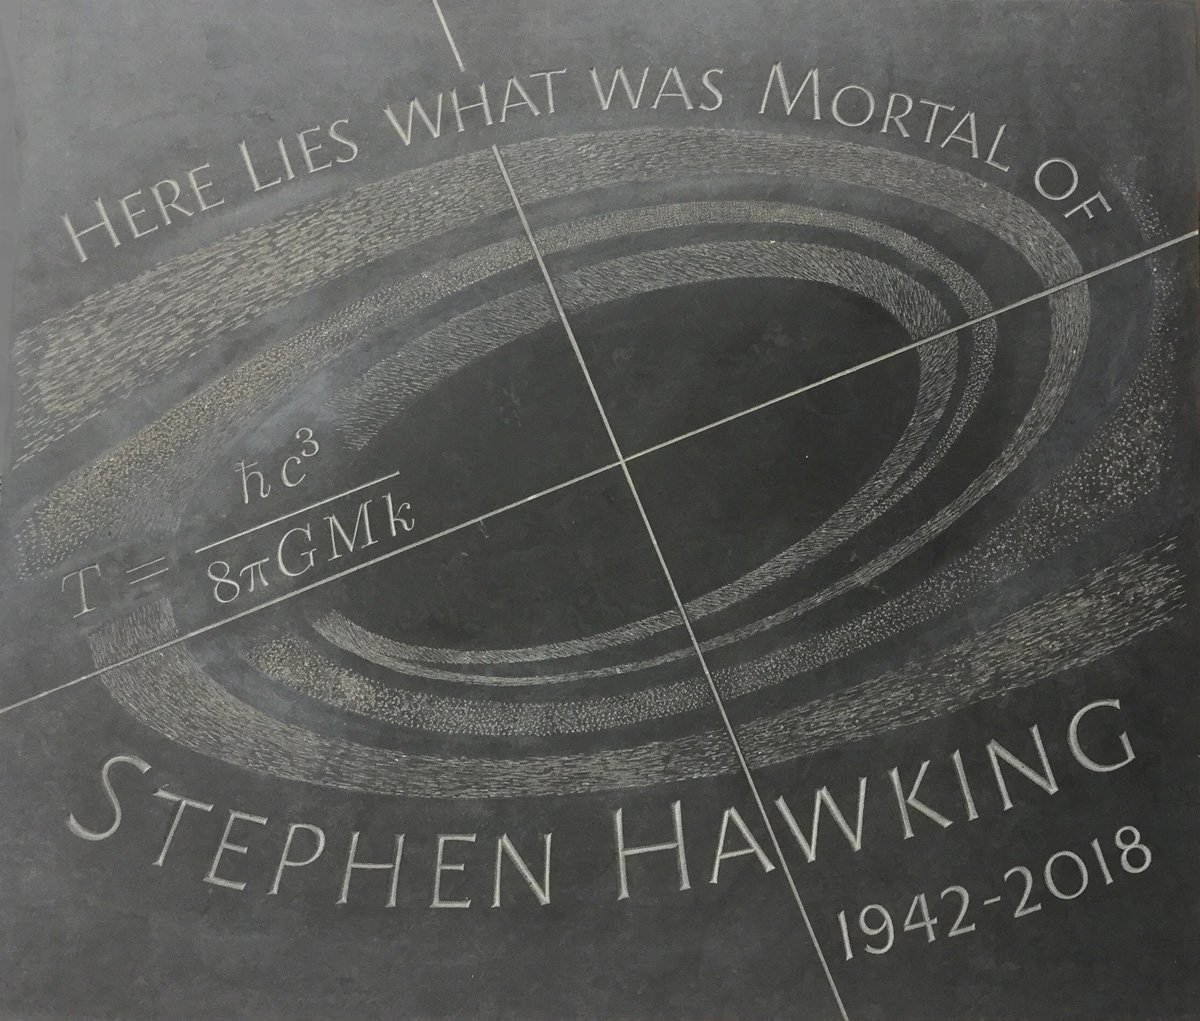 This is the memorial stone on Stephen Hawking's grave in Westminster Abbey which carries his most famous equation, describing the entropy of a black hole.